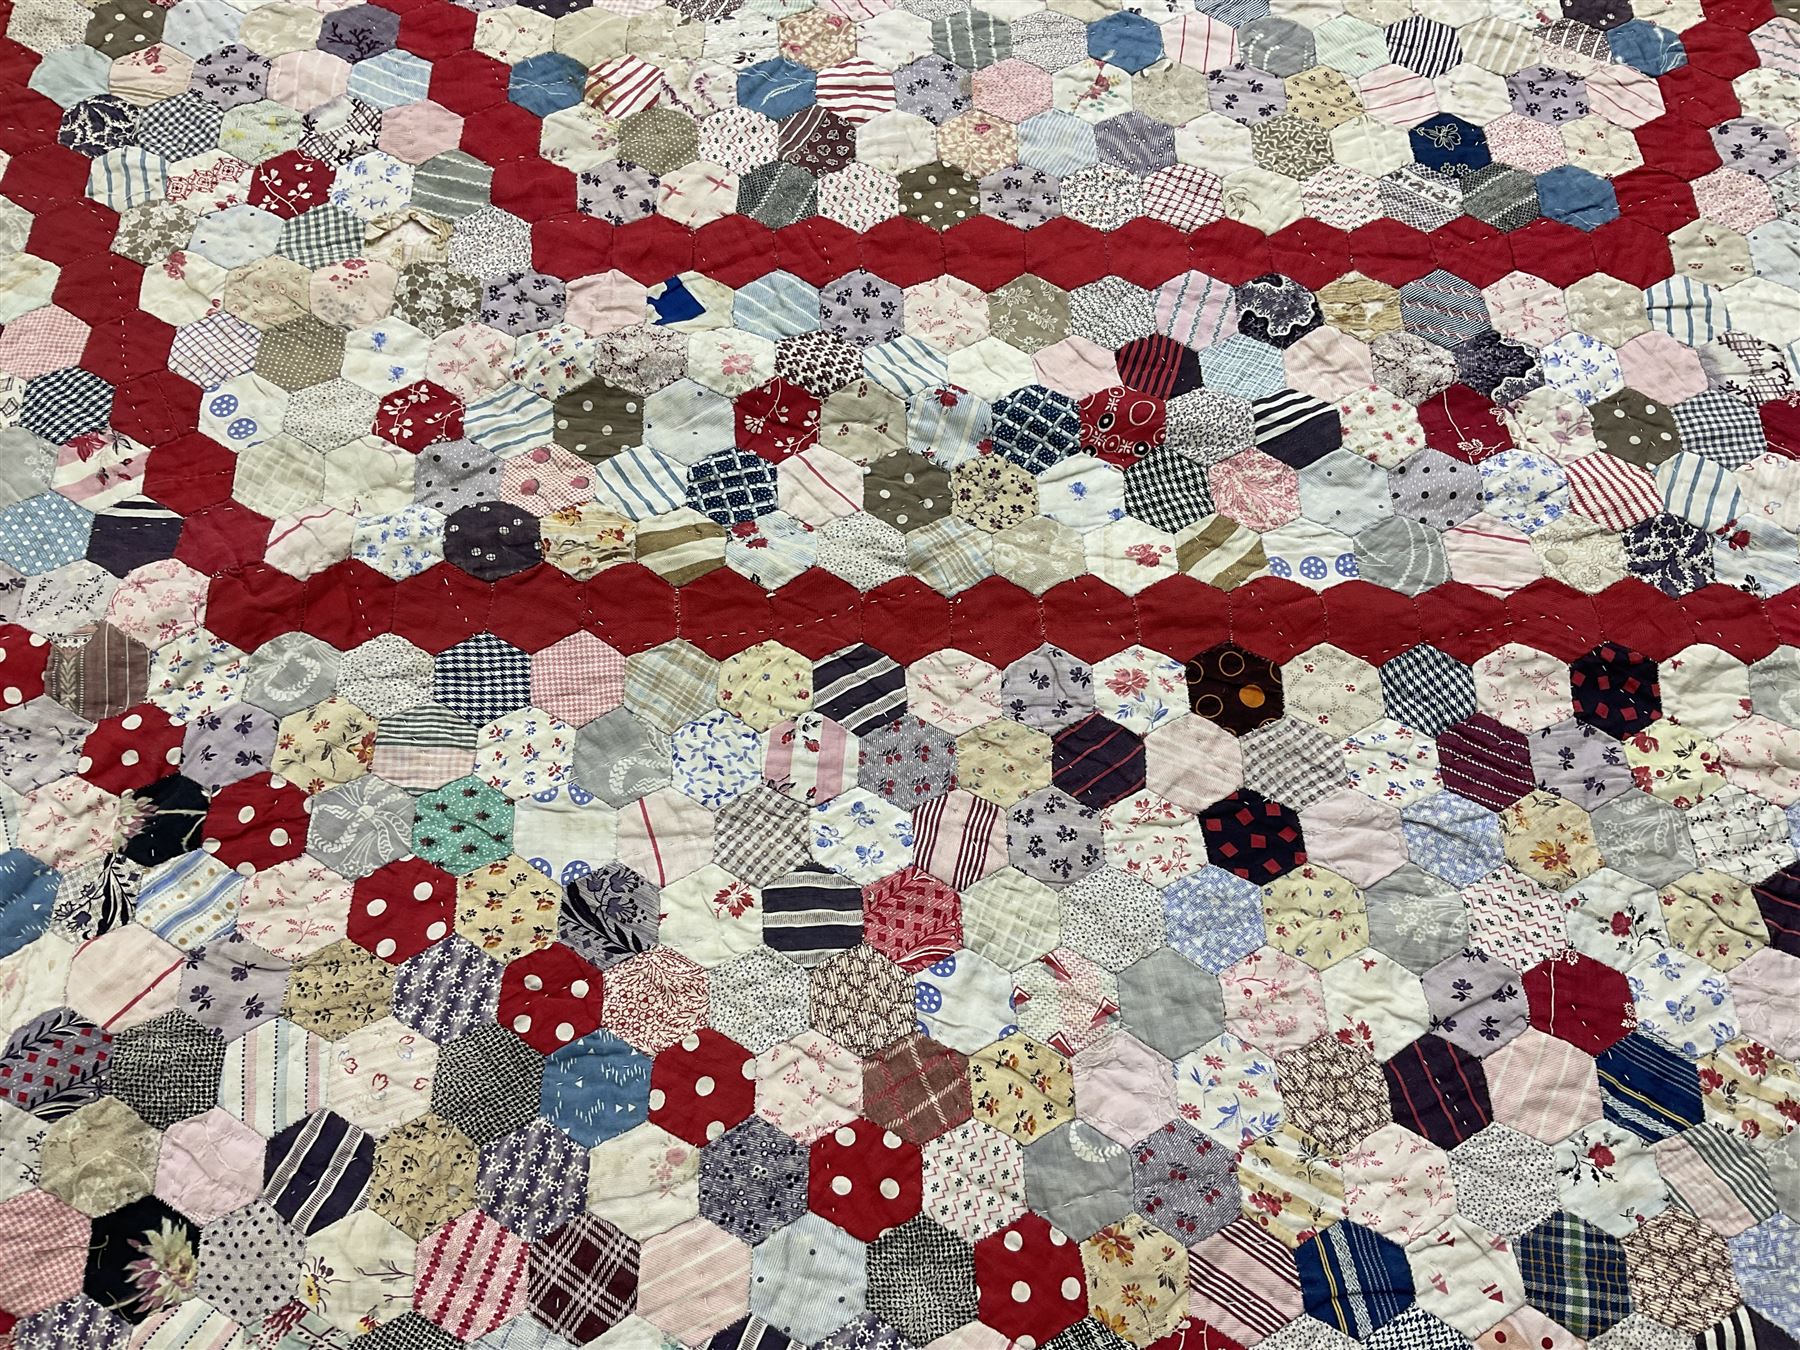 19th century patchwork quilt - Image 8 of 8